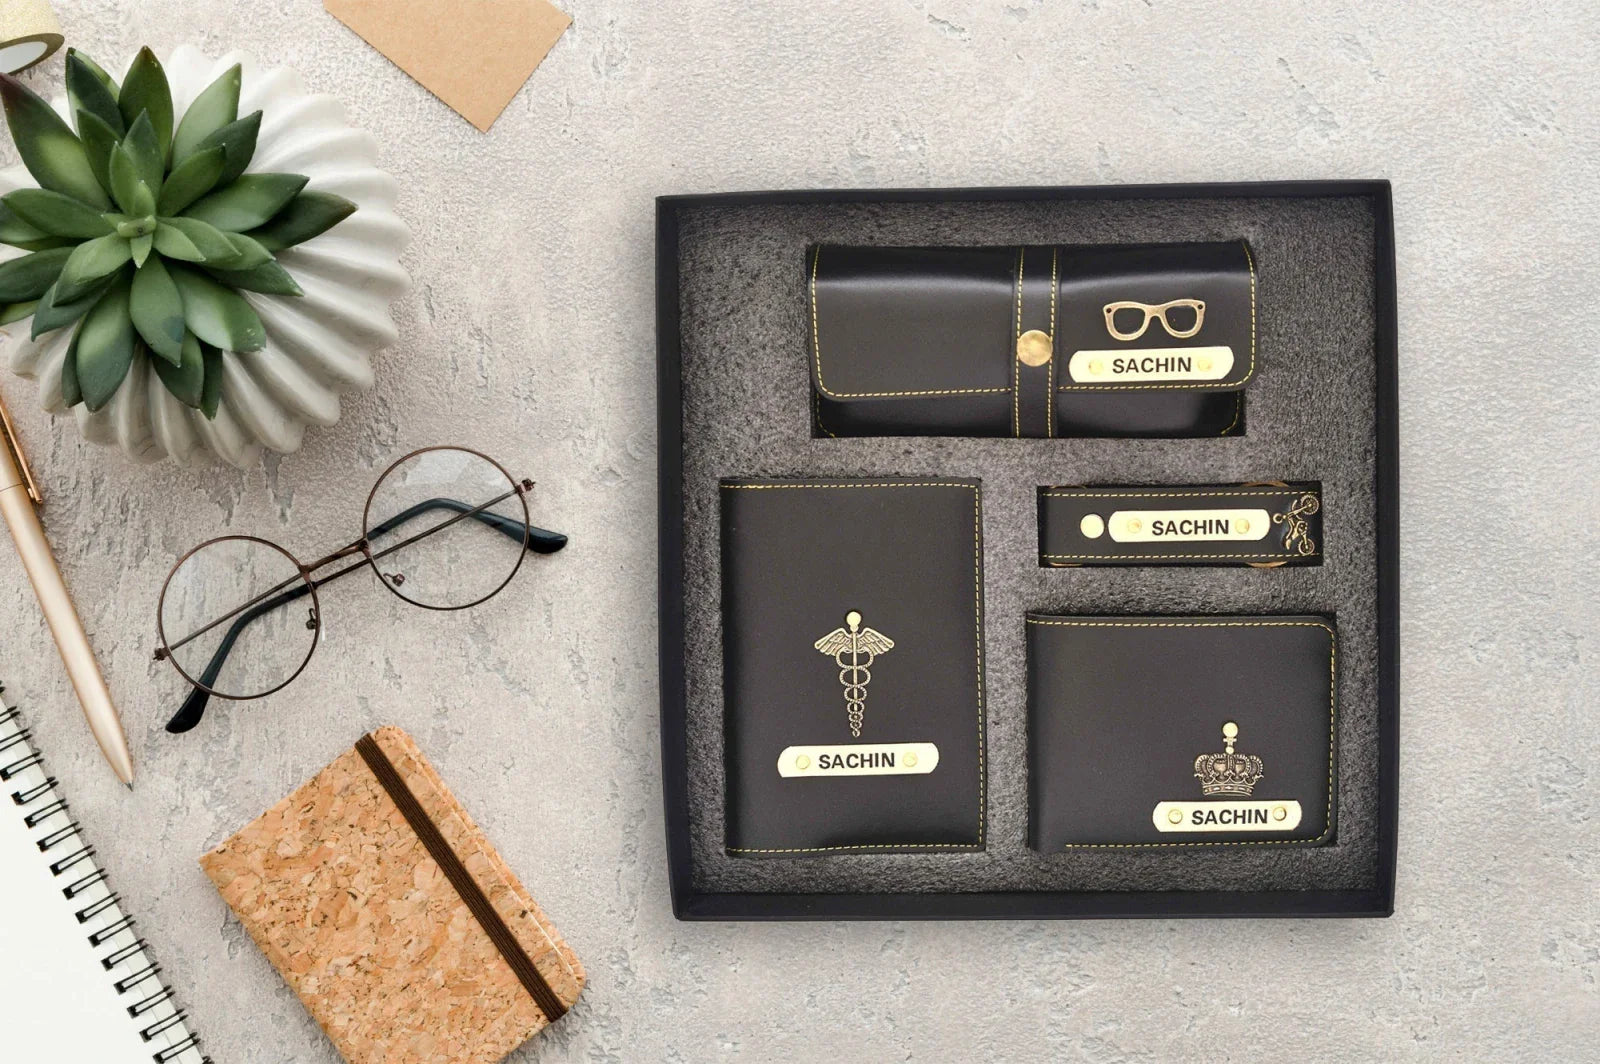 Personalized All in One Men's Combo (4 pcs) - Black - Your Gift Studio. Classy, stylish, elegant and affordable combos are the perfect fir for gifts.